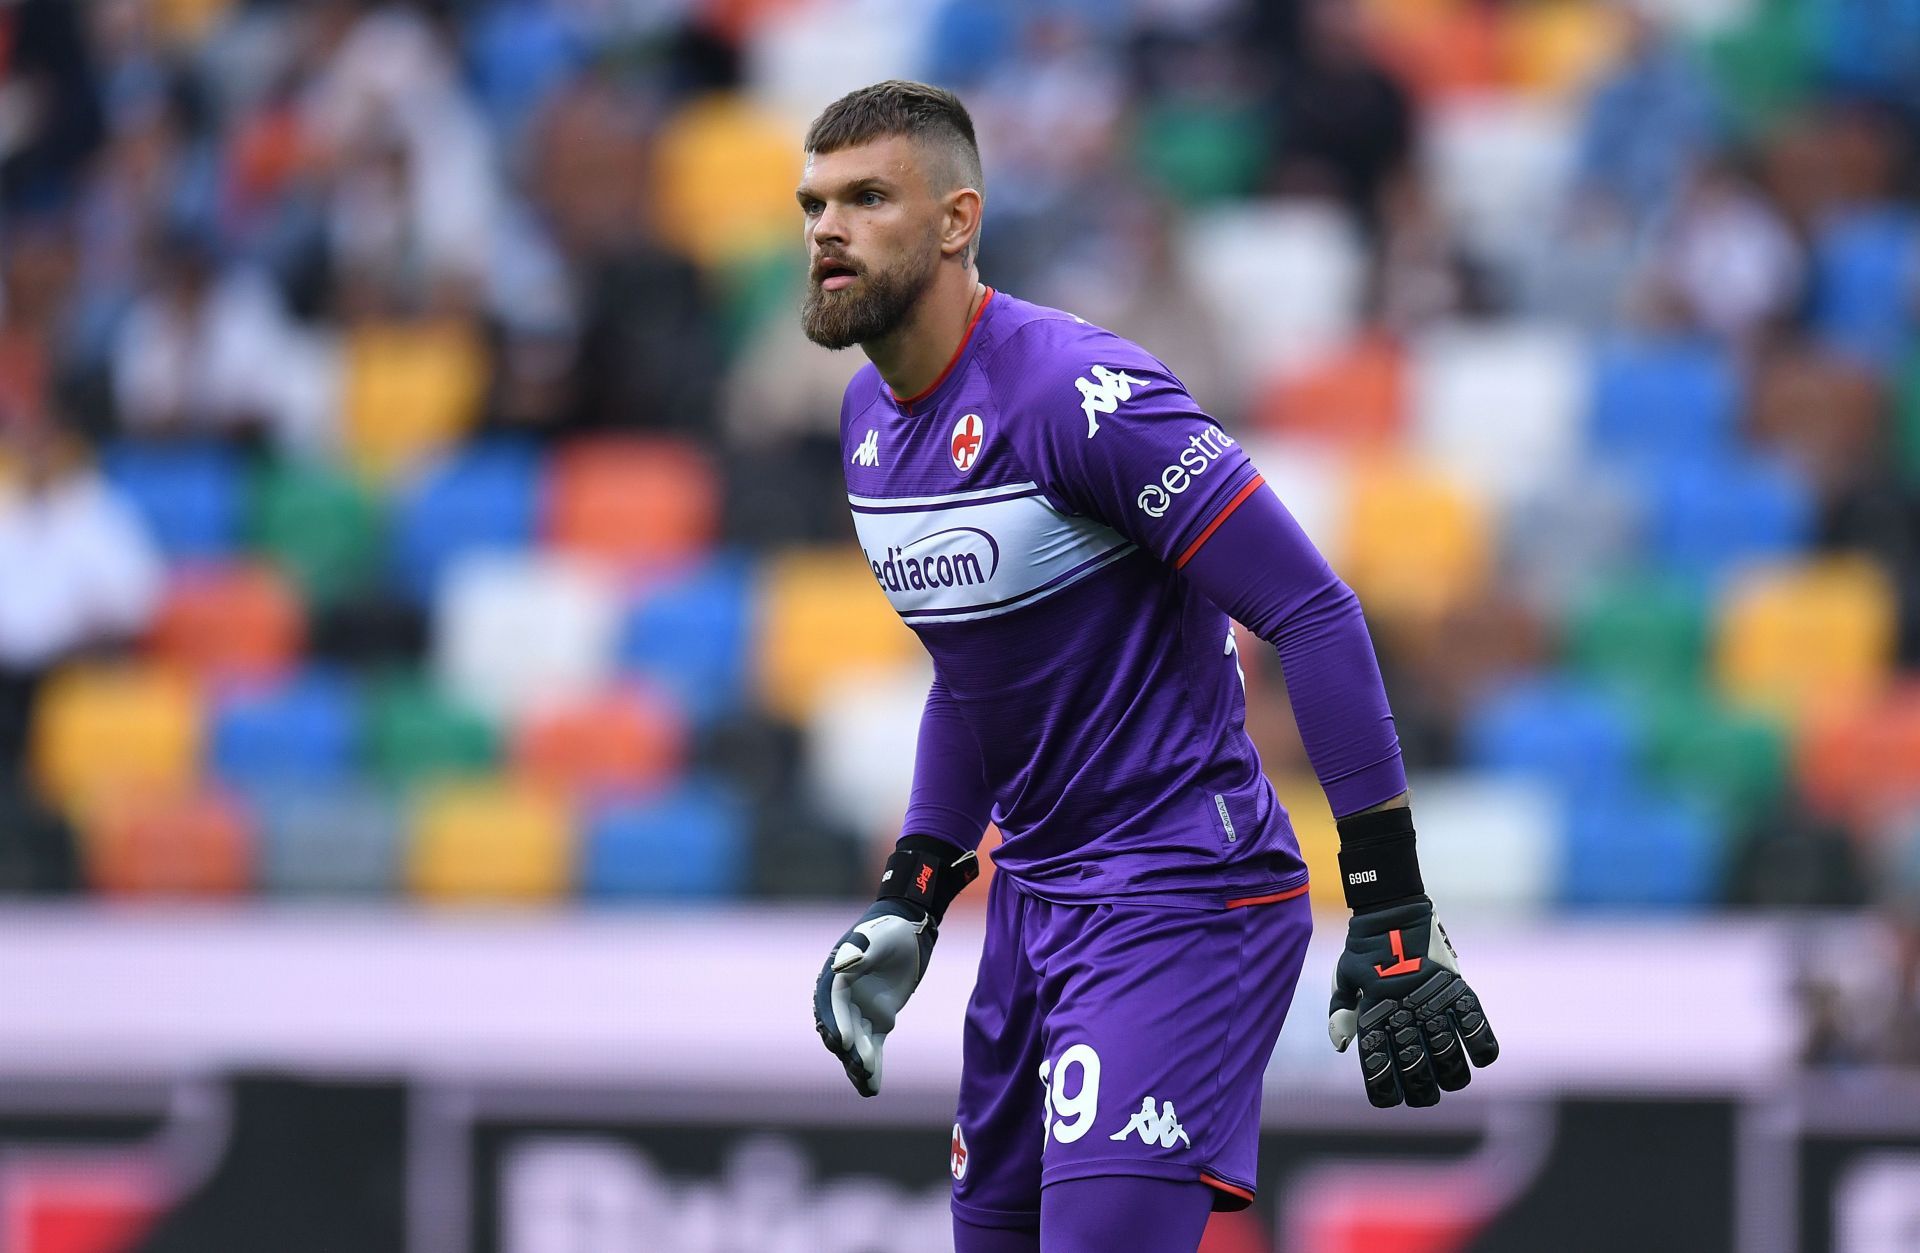 Dragowski will be a huge miss for Fiorentina